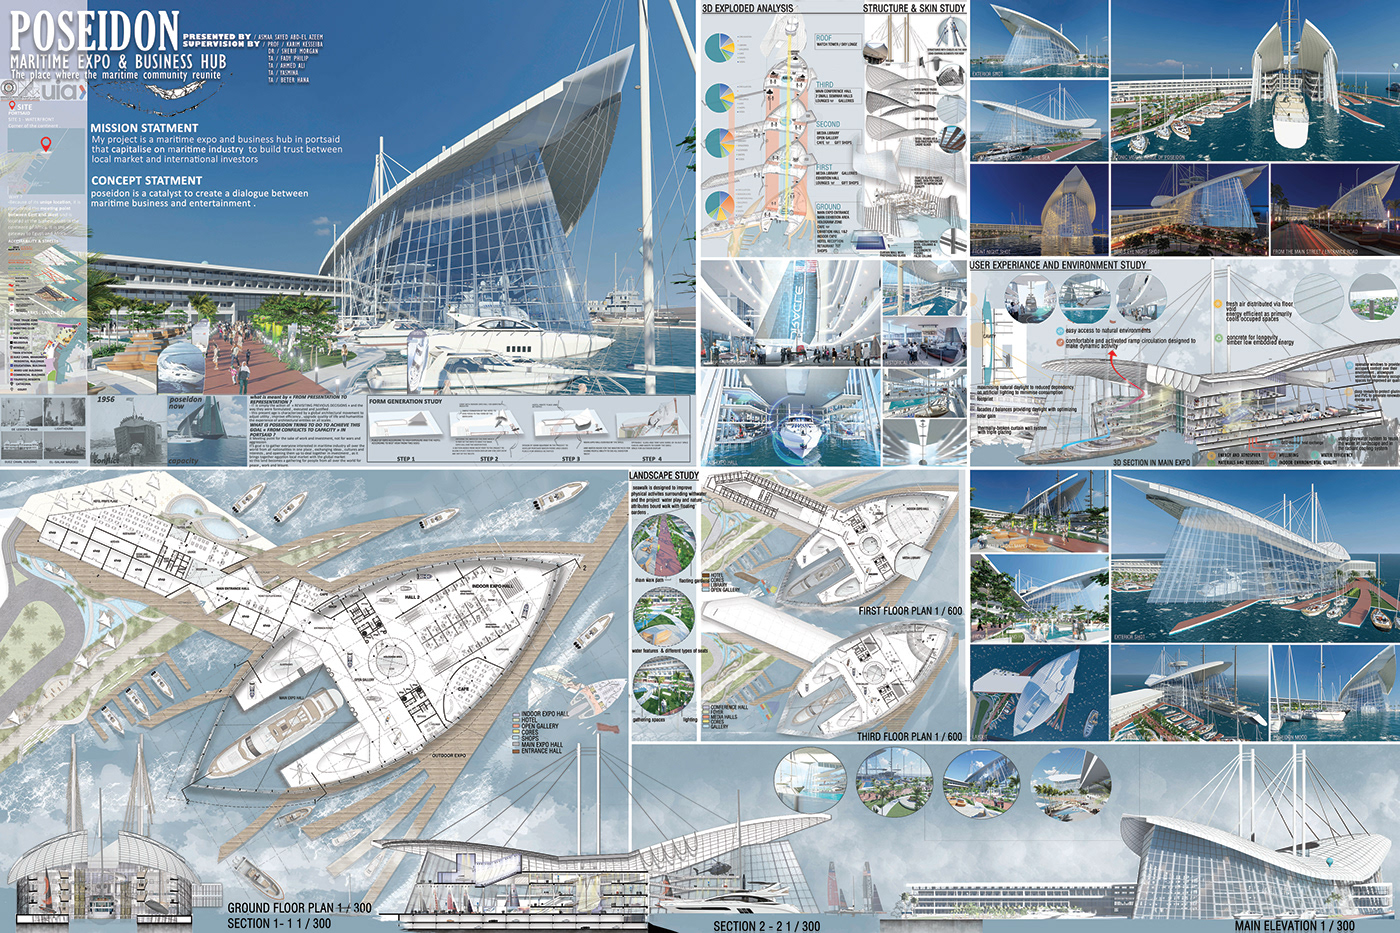 architecture concept design exterior modern Render visualization Yacht Expo